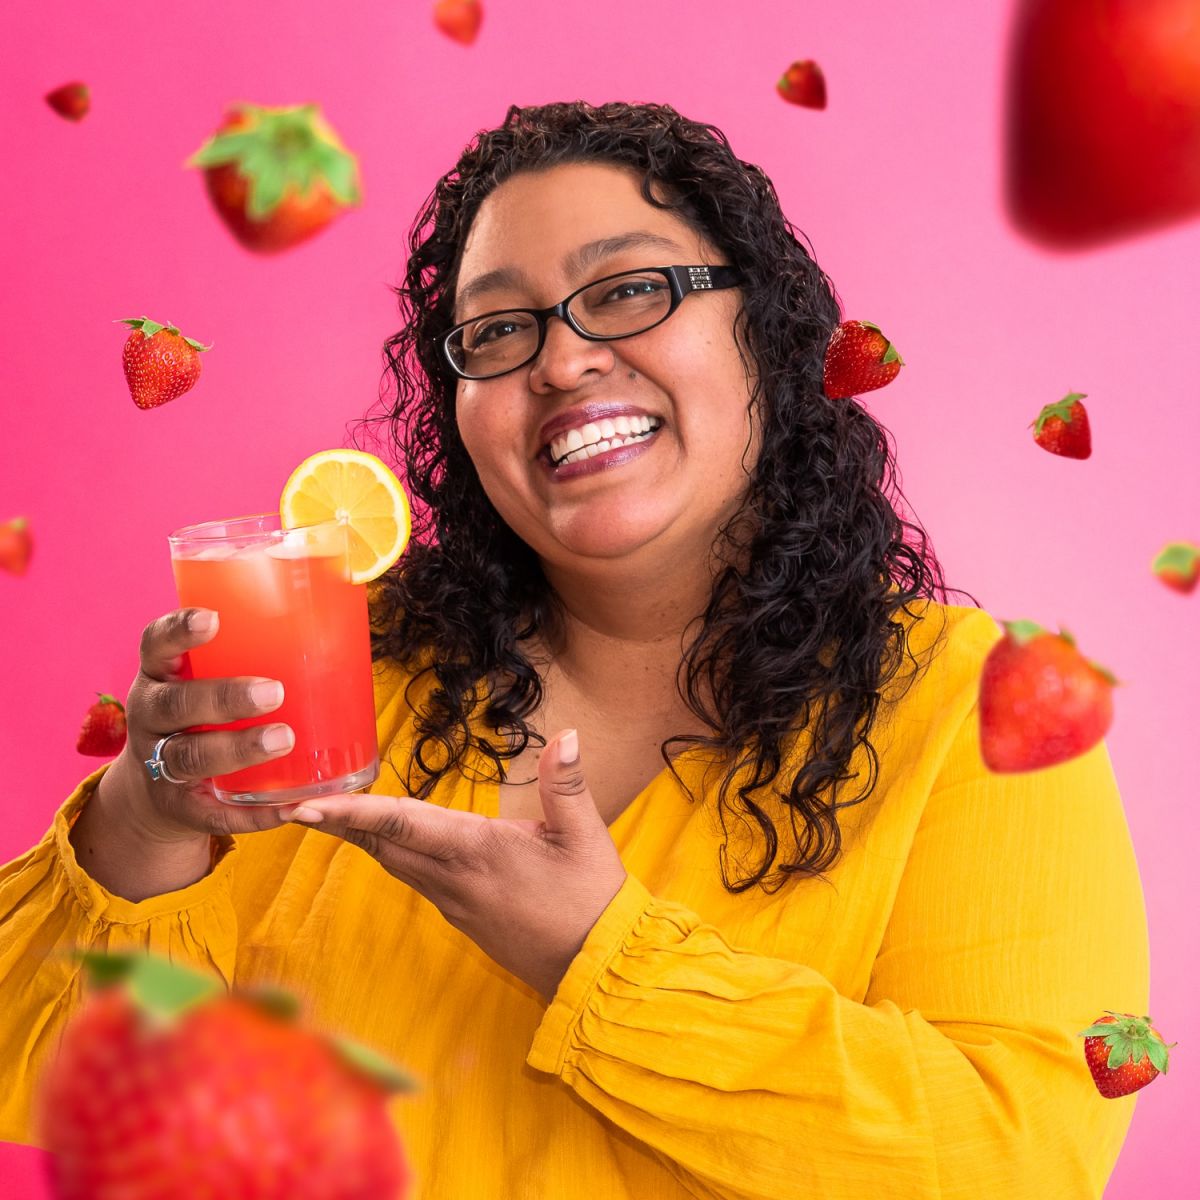 sandra cruz surrounded by strawberries and holding a drink